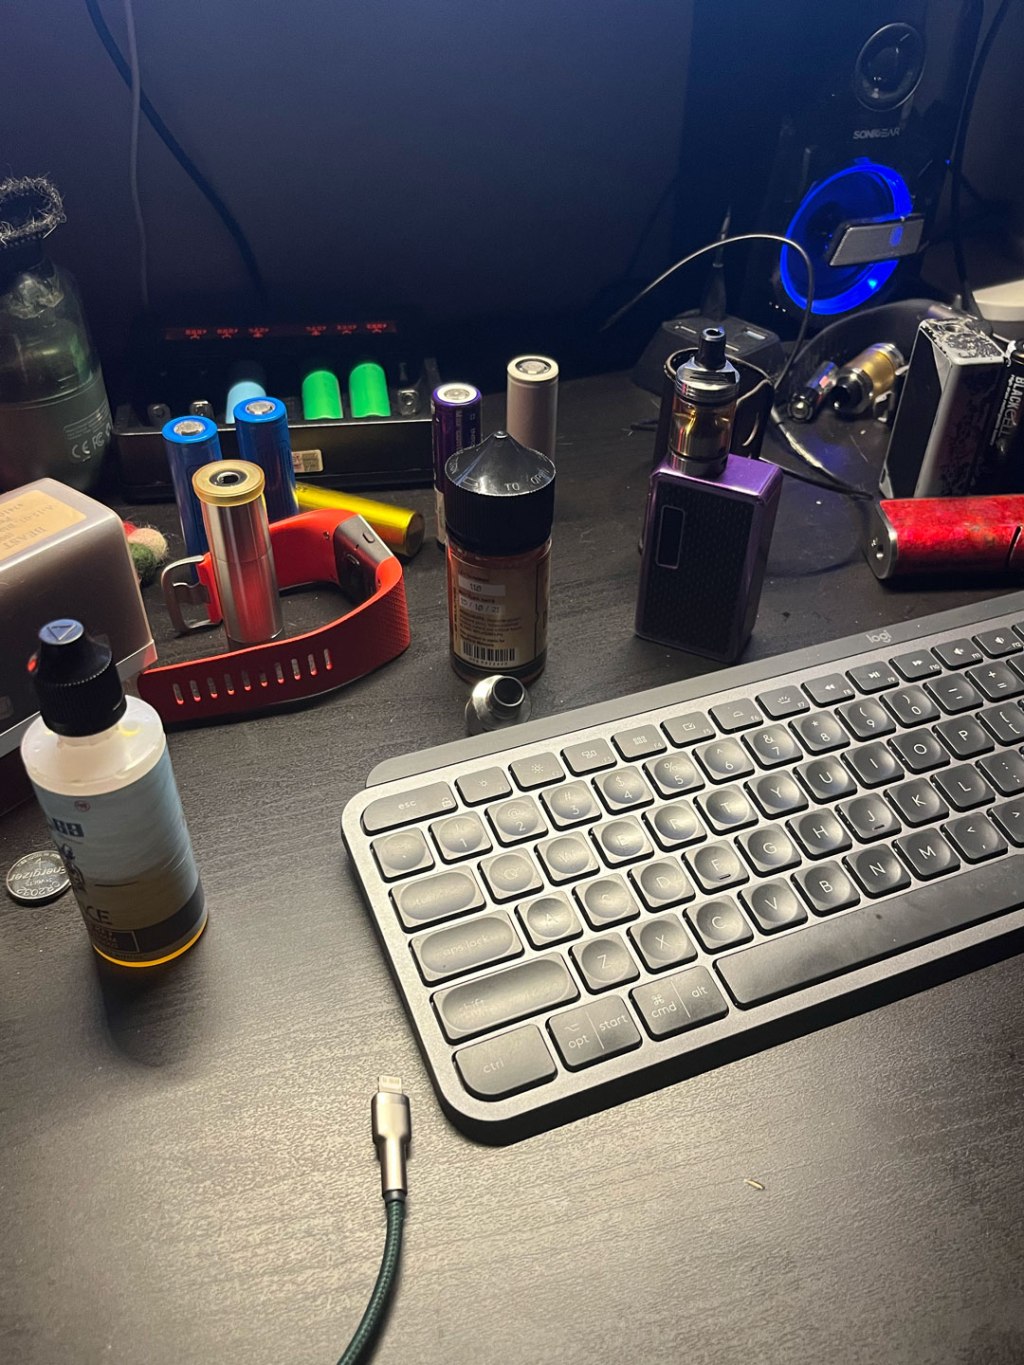 Vaping in 2022 and beyond